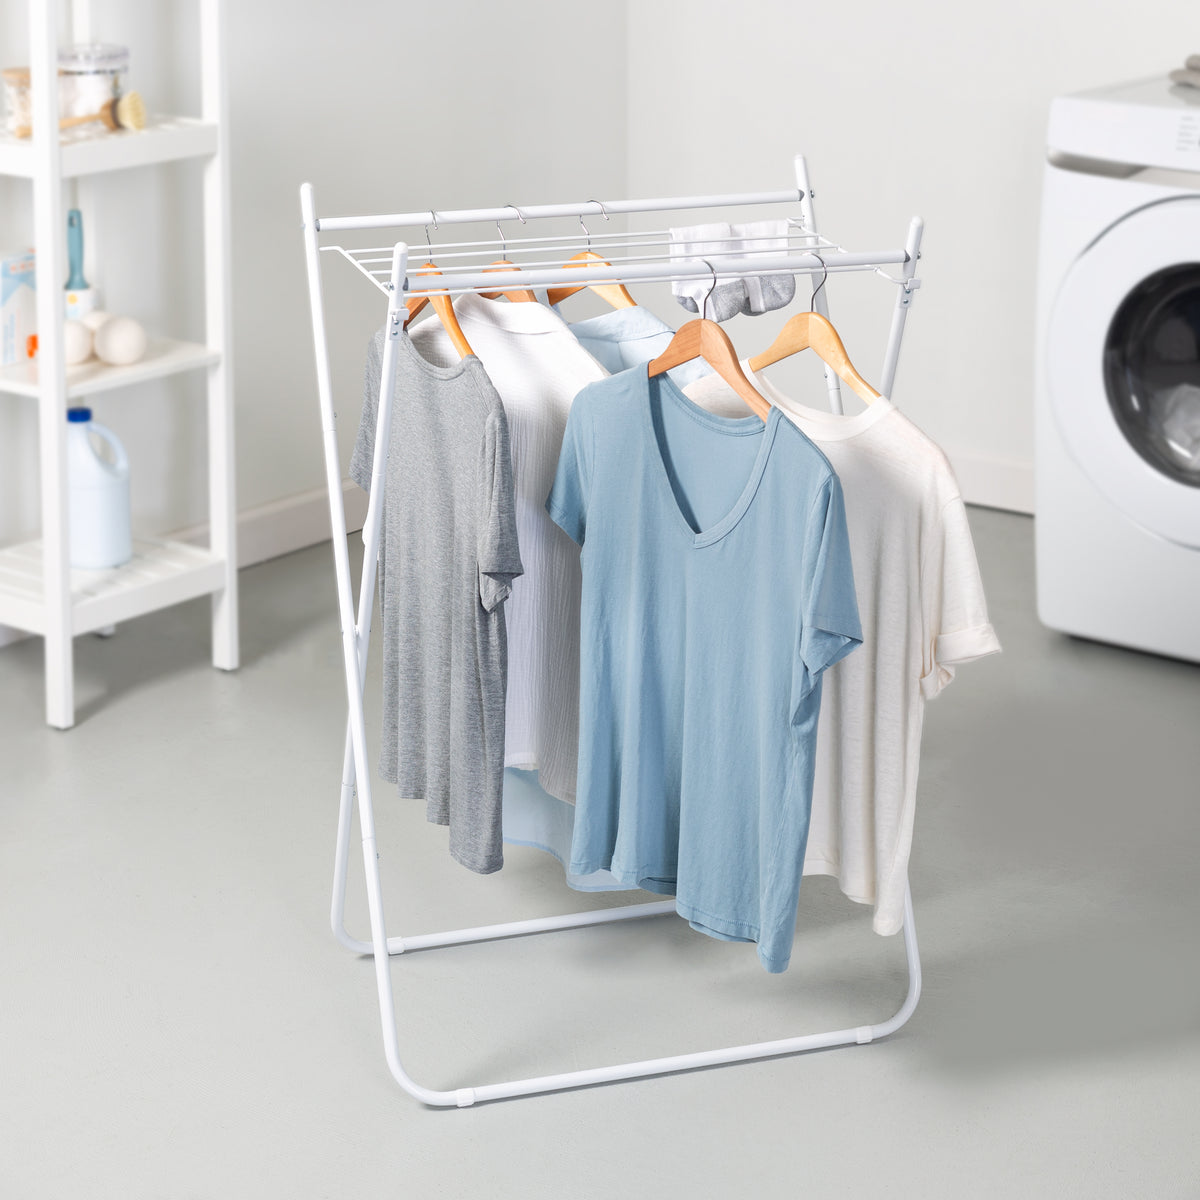 Honey-Can-Do 22 in. x 58 in. White Steel Portable Clothes Drying